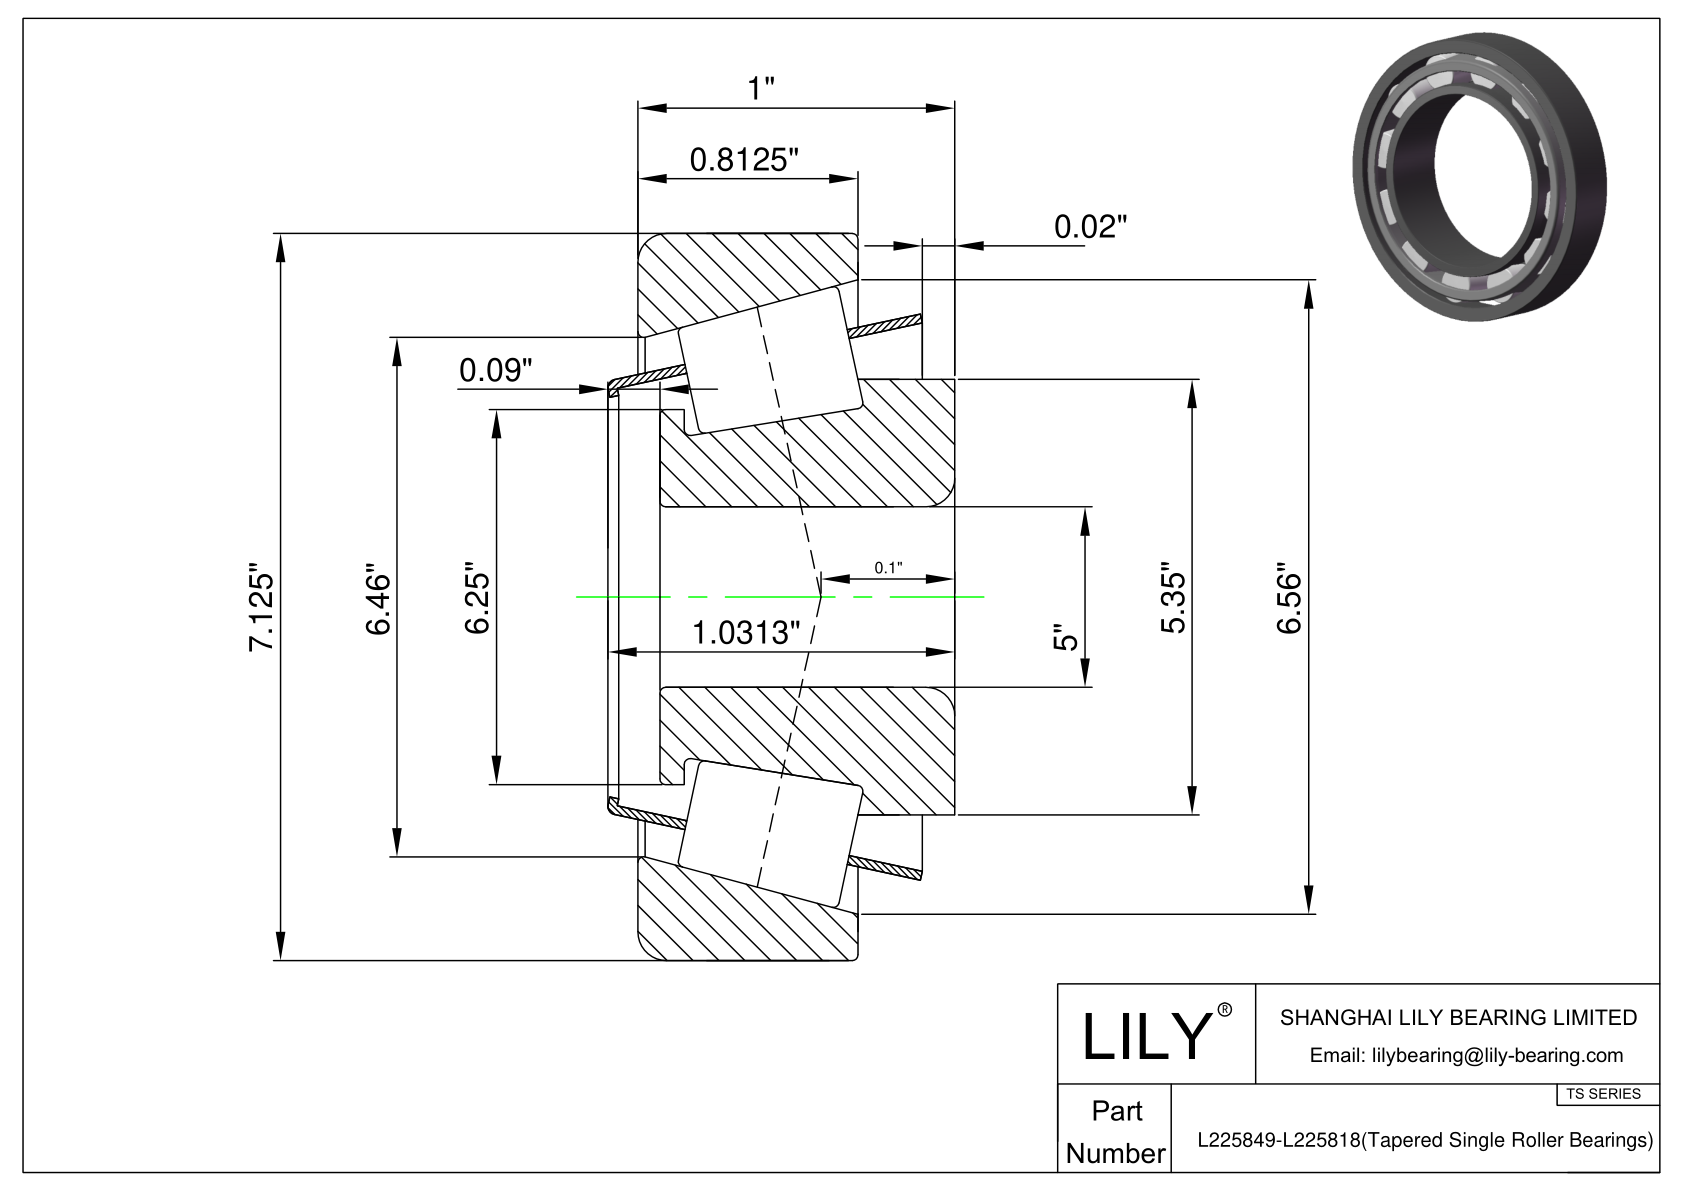 L225849-L225818 TS (Tapered Single Roller Bearings) (Imperial) cad drawing